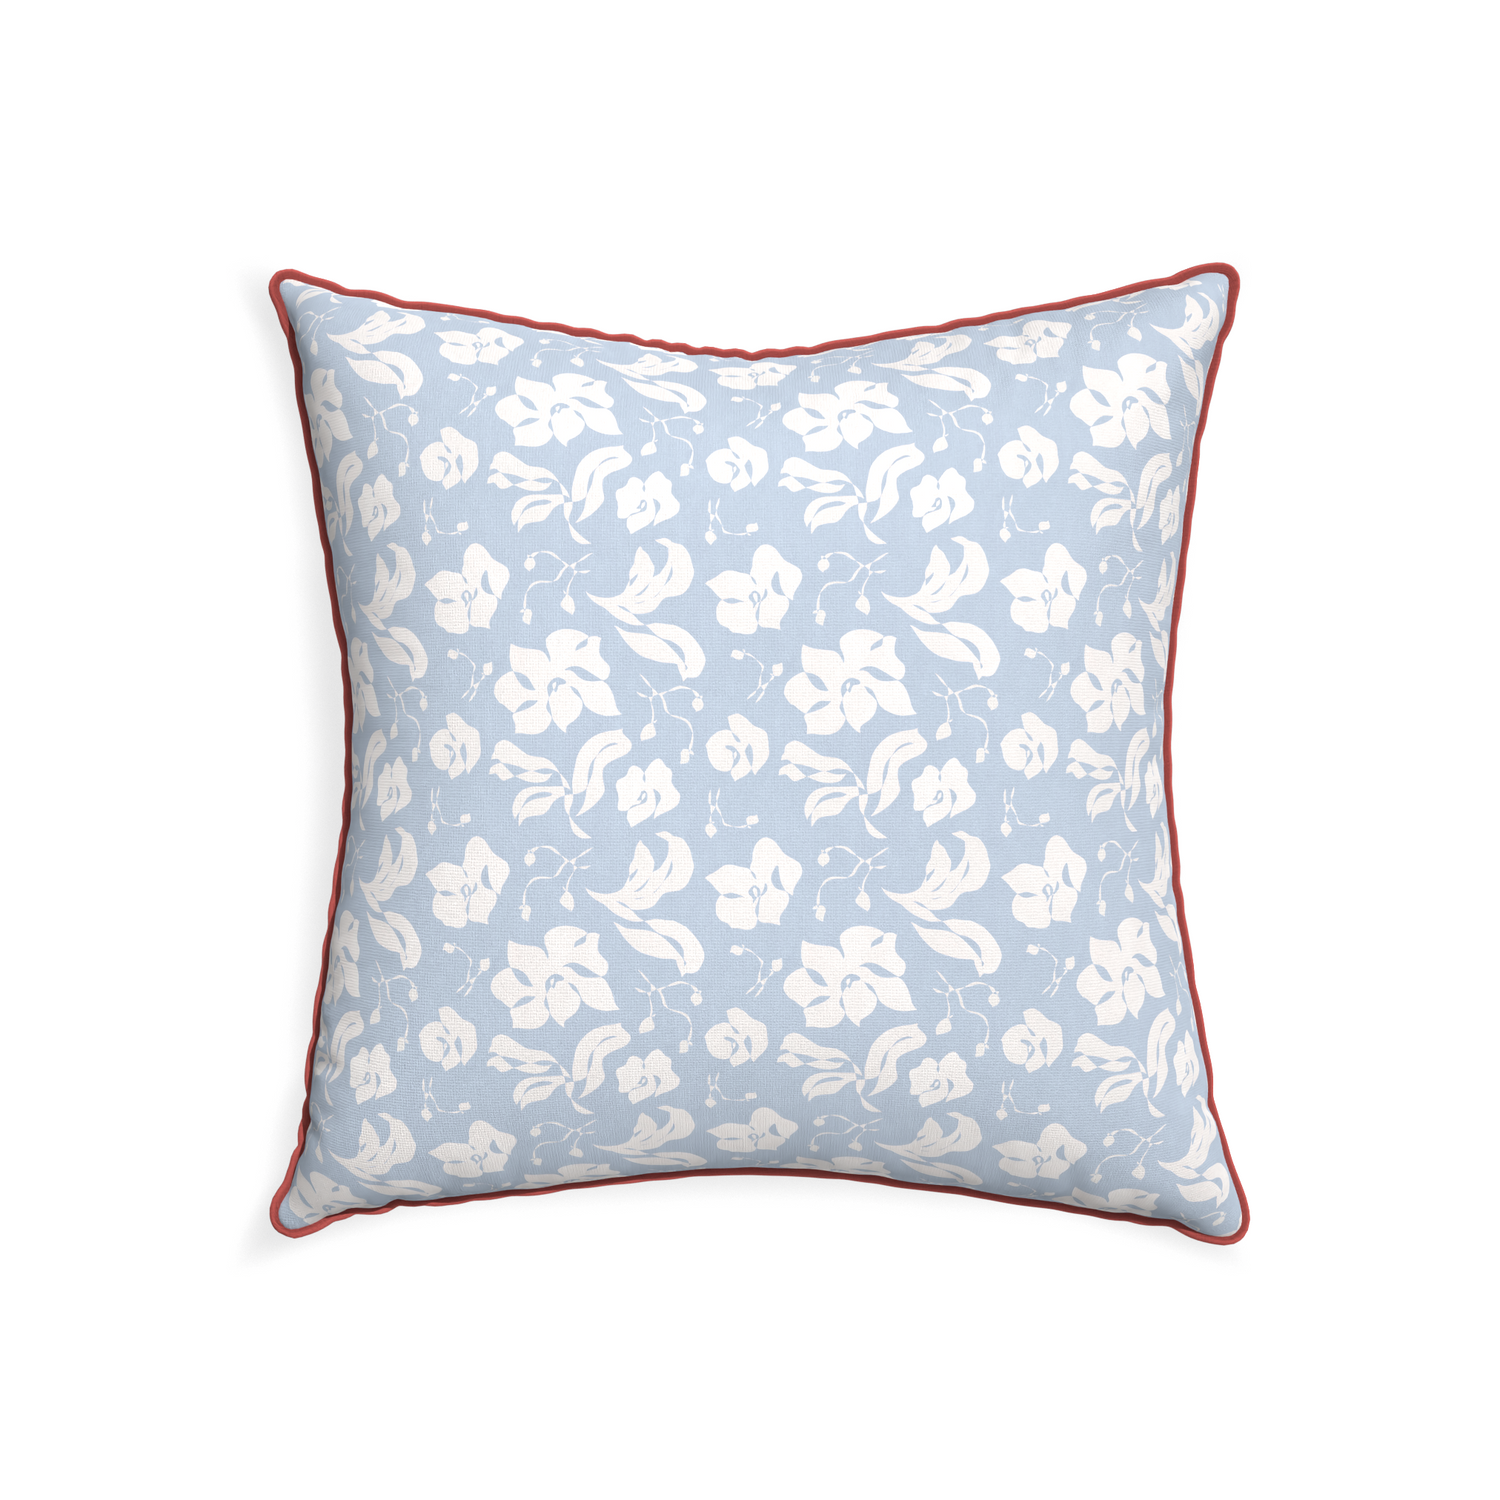 22-square georgia custom pillow with c piping on white background